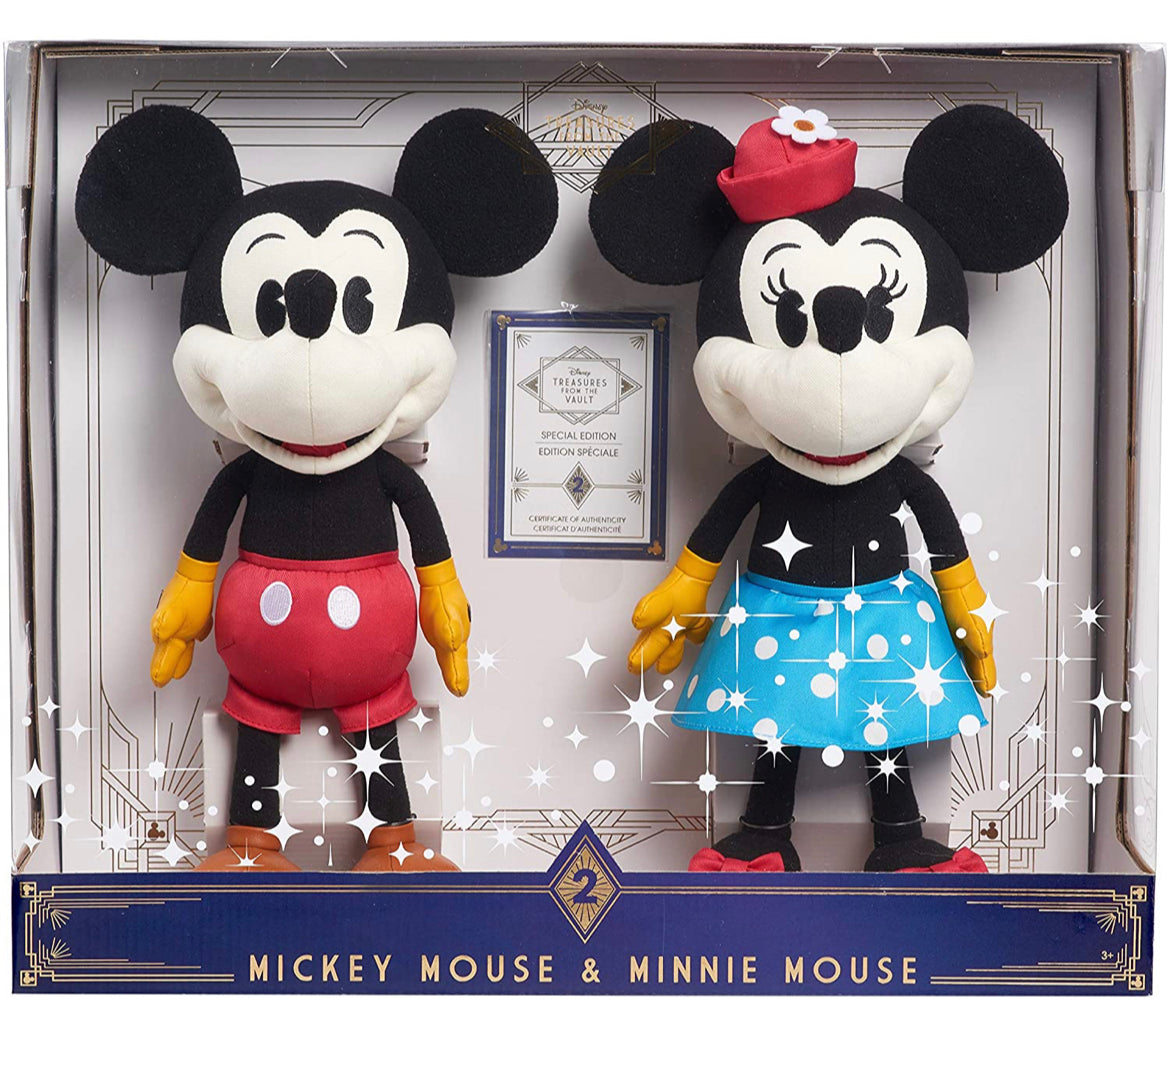 Disney Treasures From the Vault, Limited Edition Mickey Mouse and Minnie Mouse Plush